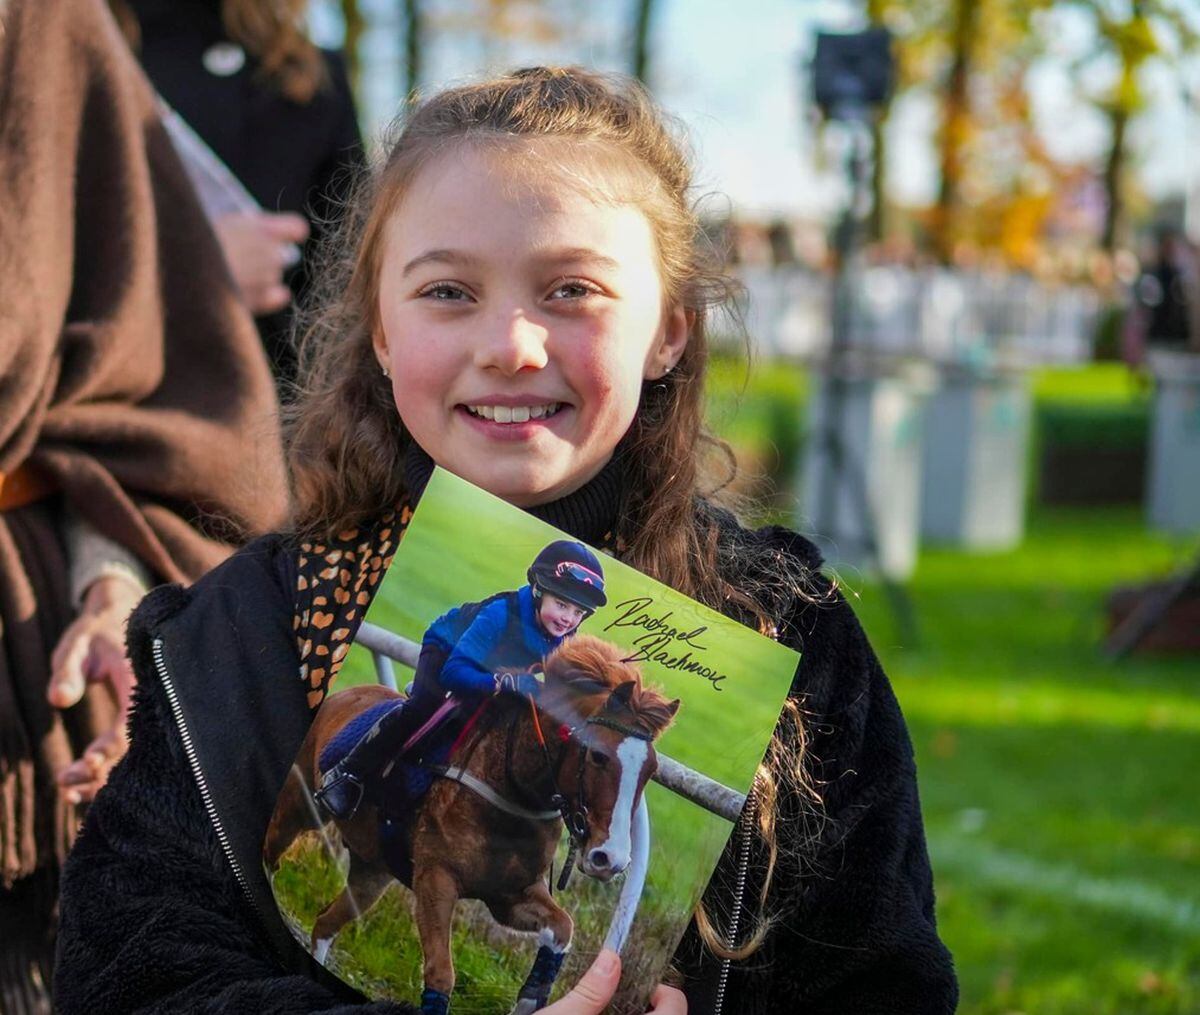 10-year-old Lexi with a signed photo of her hero, Rachael Blackmore.  Photo: Ryan Day Photography.